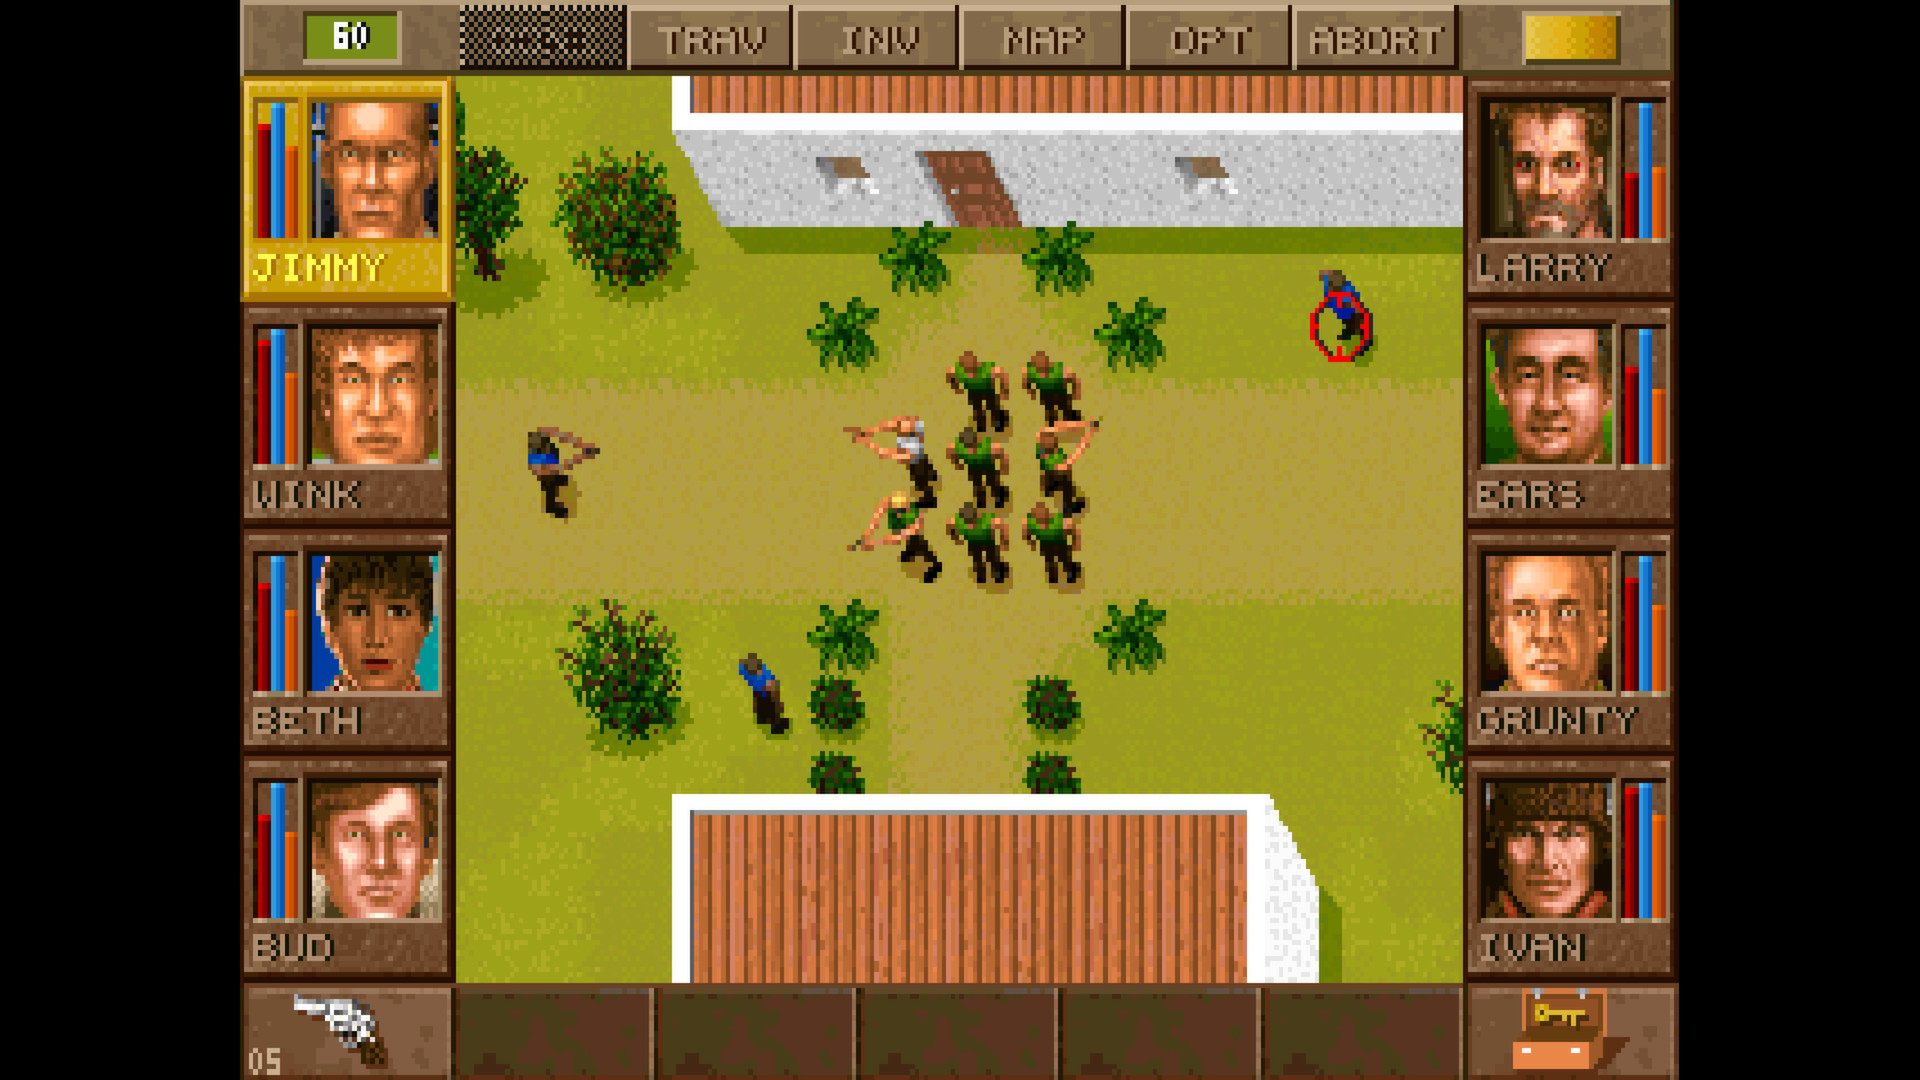 jagged alliance gold end a day